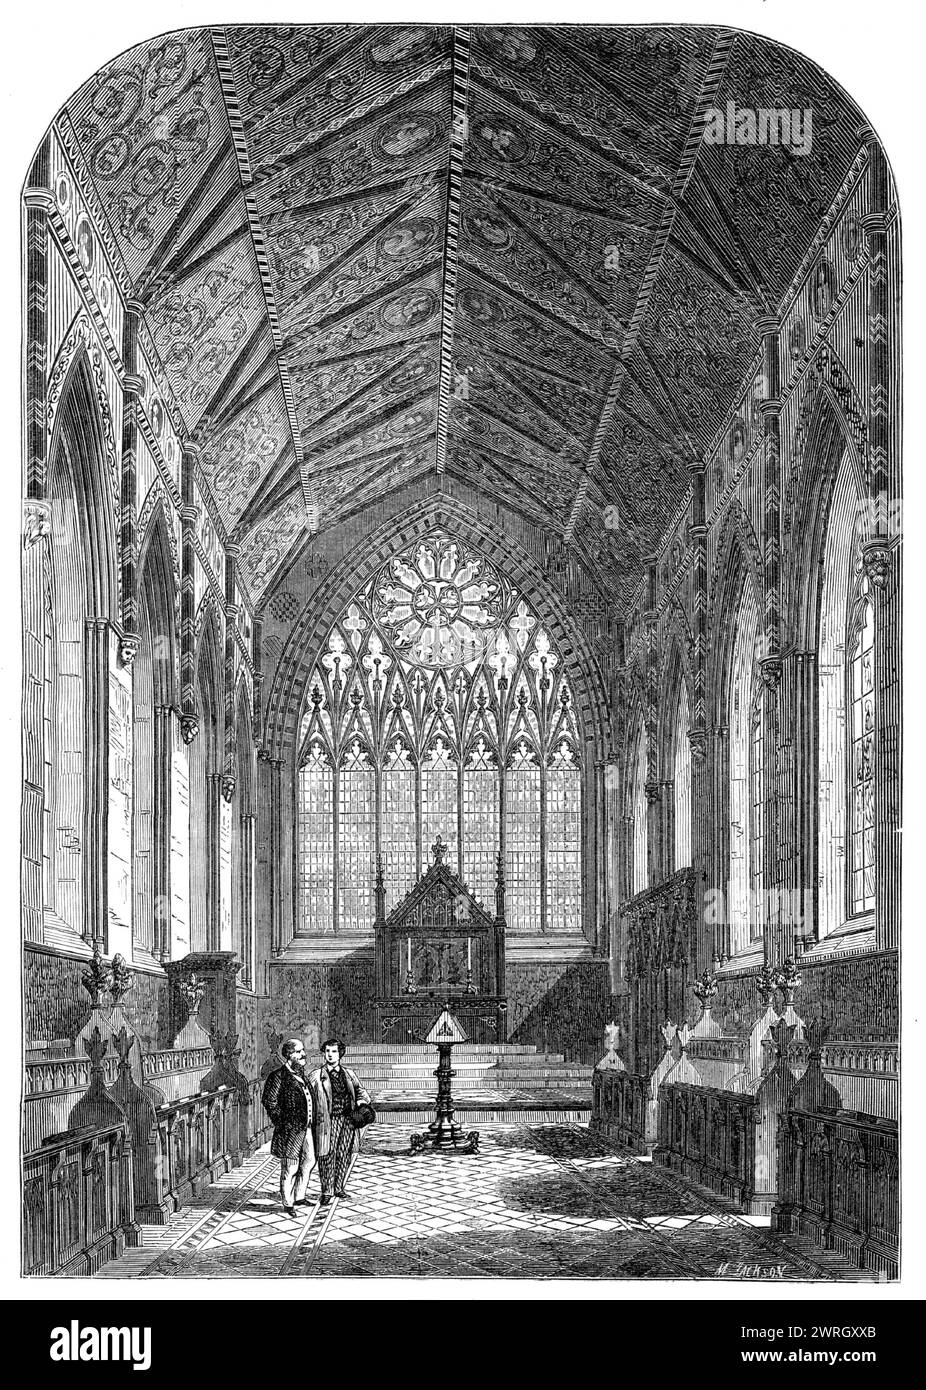 Views of Merton College, Oxford: the Chapel, 1864. 'The Chapel, a peculiar building of great beauty, being anciently the parish church of St. John the Baptist, continues to this day parochial as well as collegiate, according to the terms of its original appropriation to the society. The building consists of the choir, the transepts, and the tower, the latter originally intended to form the centre of a cross; but the nave and side aisles were never completed. Adjoining the church are the remains of the ancient Lady Chapel, St. Mary's, the old church. Though it was successively a chapel, or chan Stock Photo